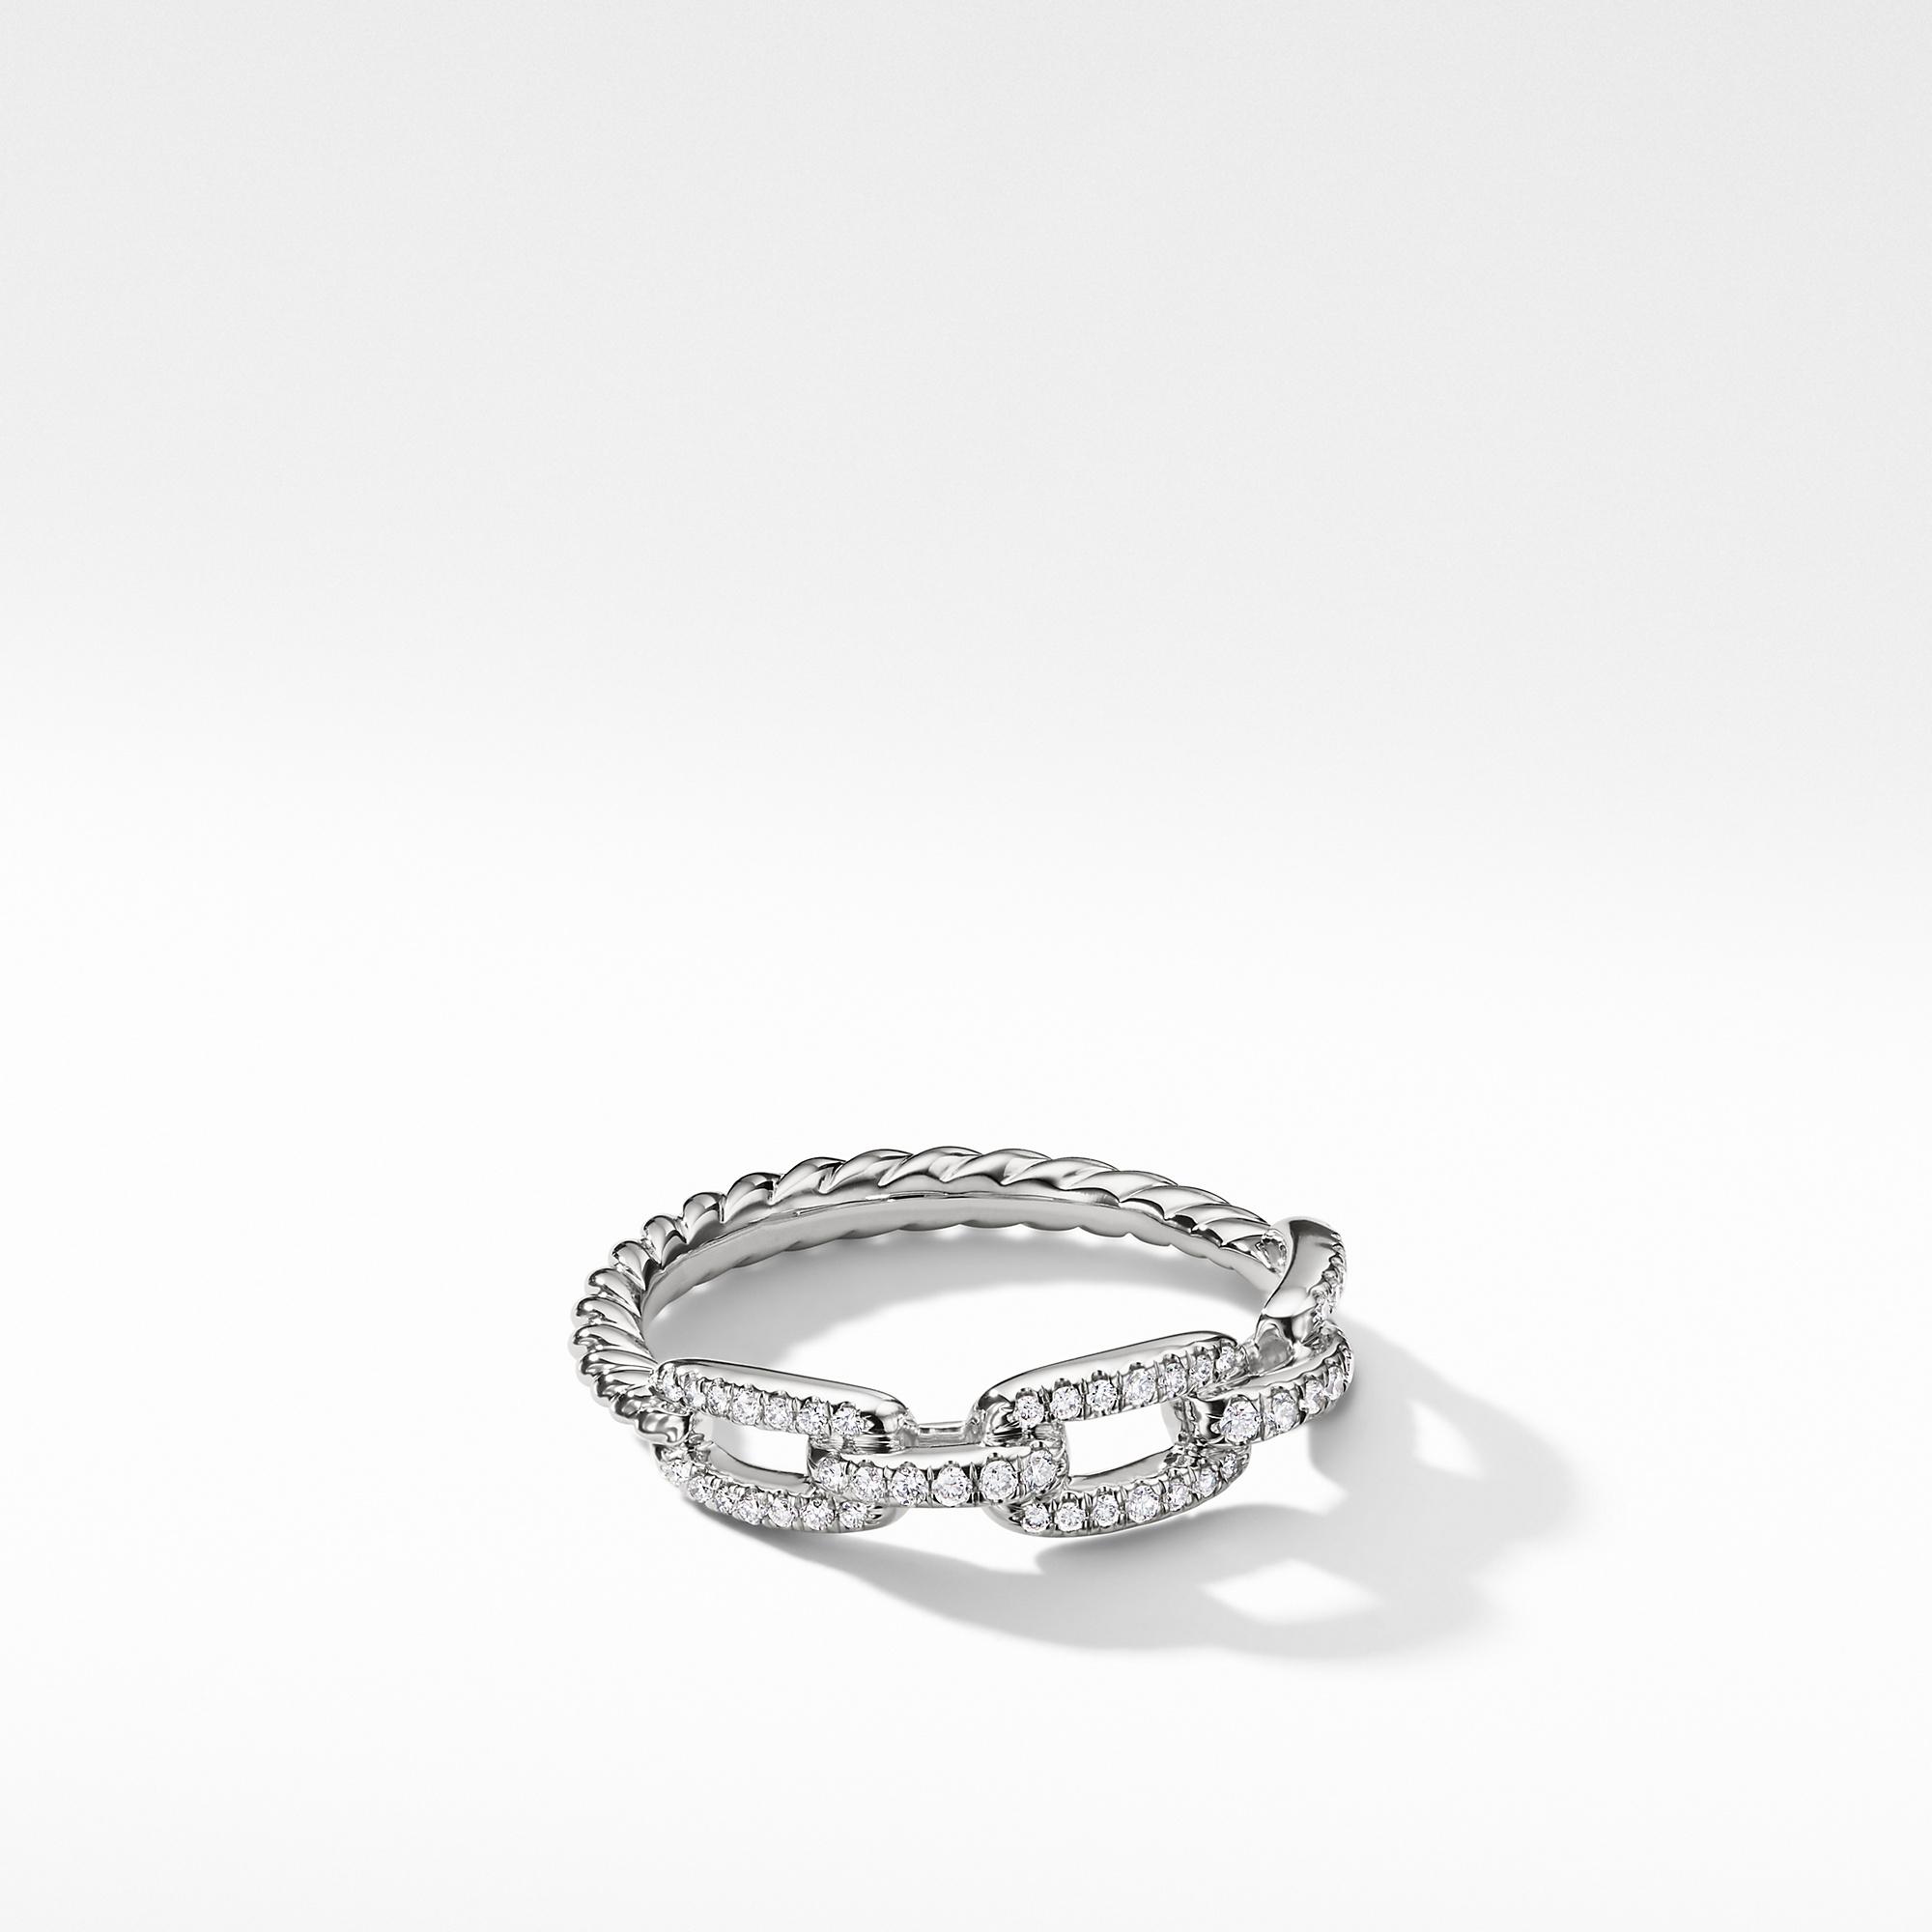 David Yurman Stax Single Row Pave Chain Link Ring with Diamonds in White Gold, size 6